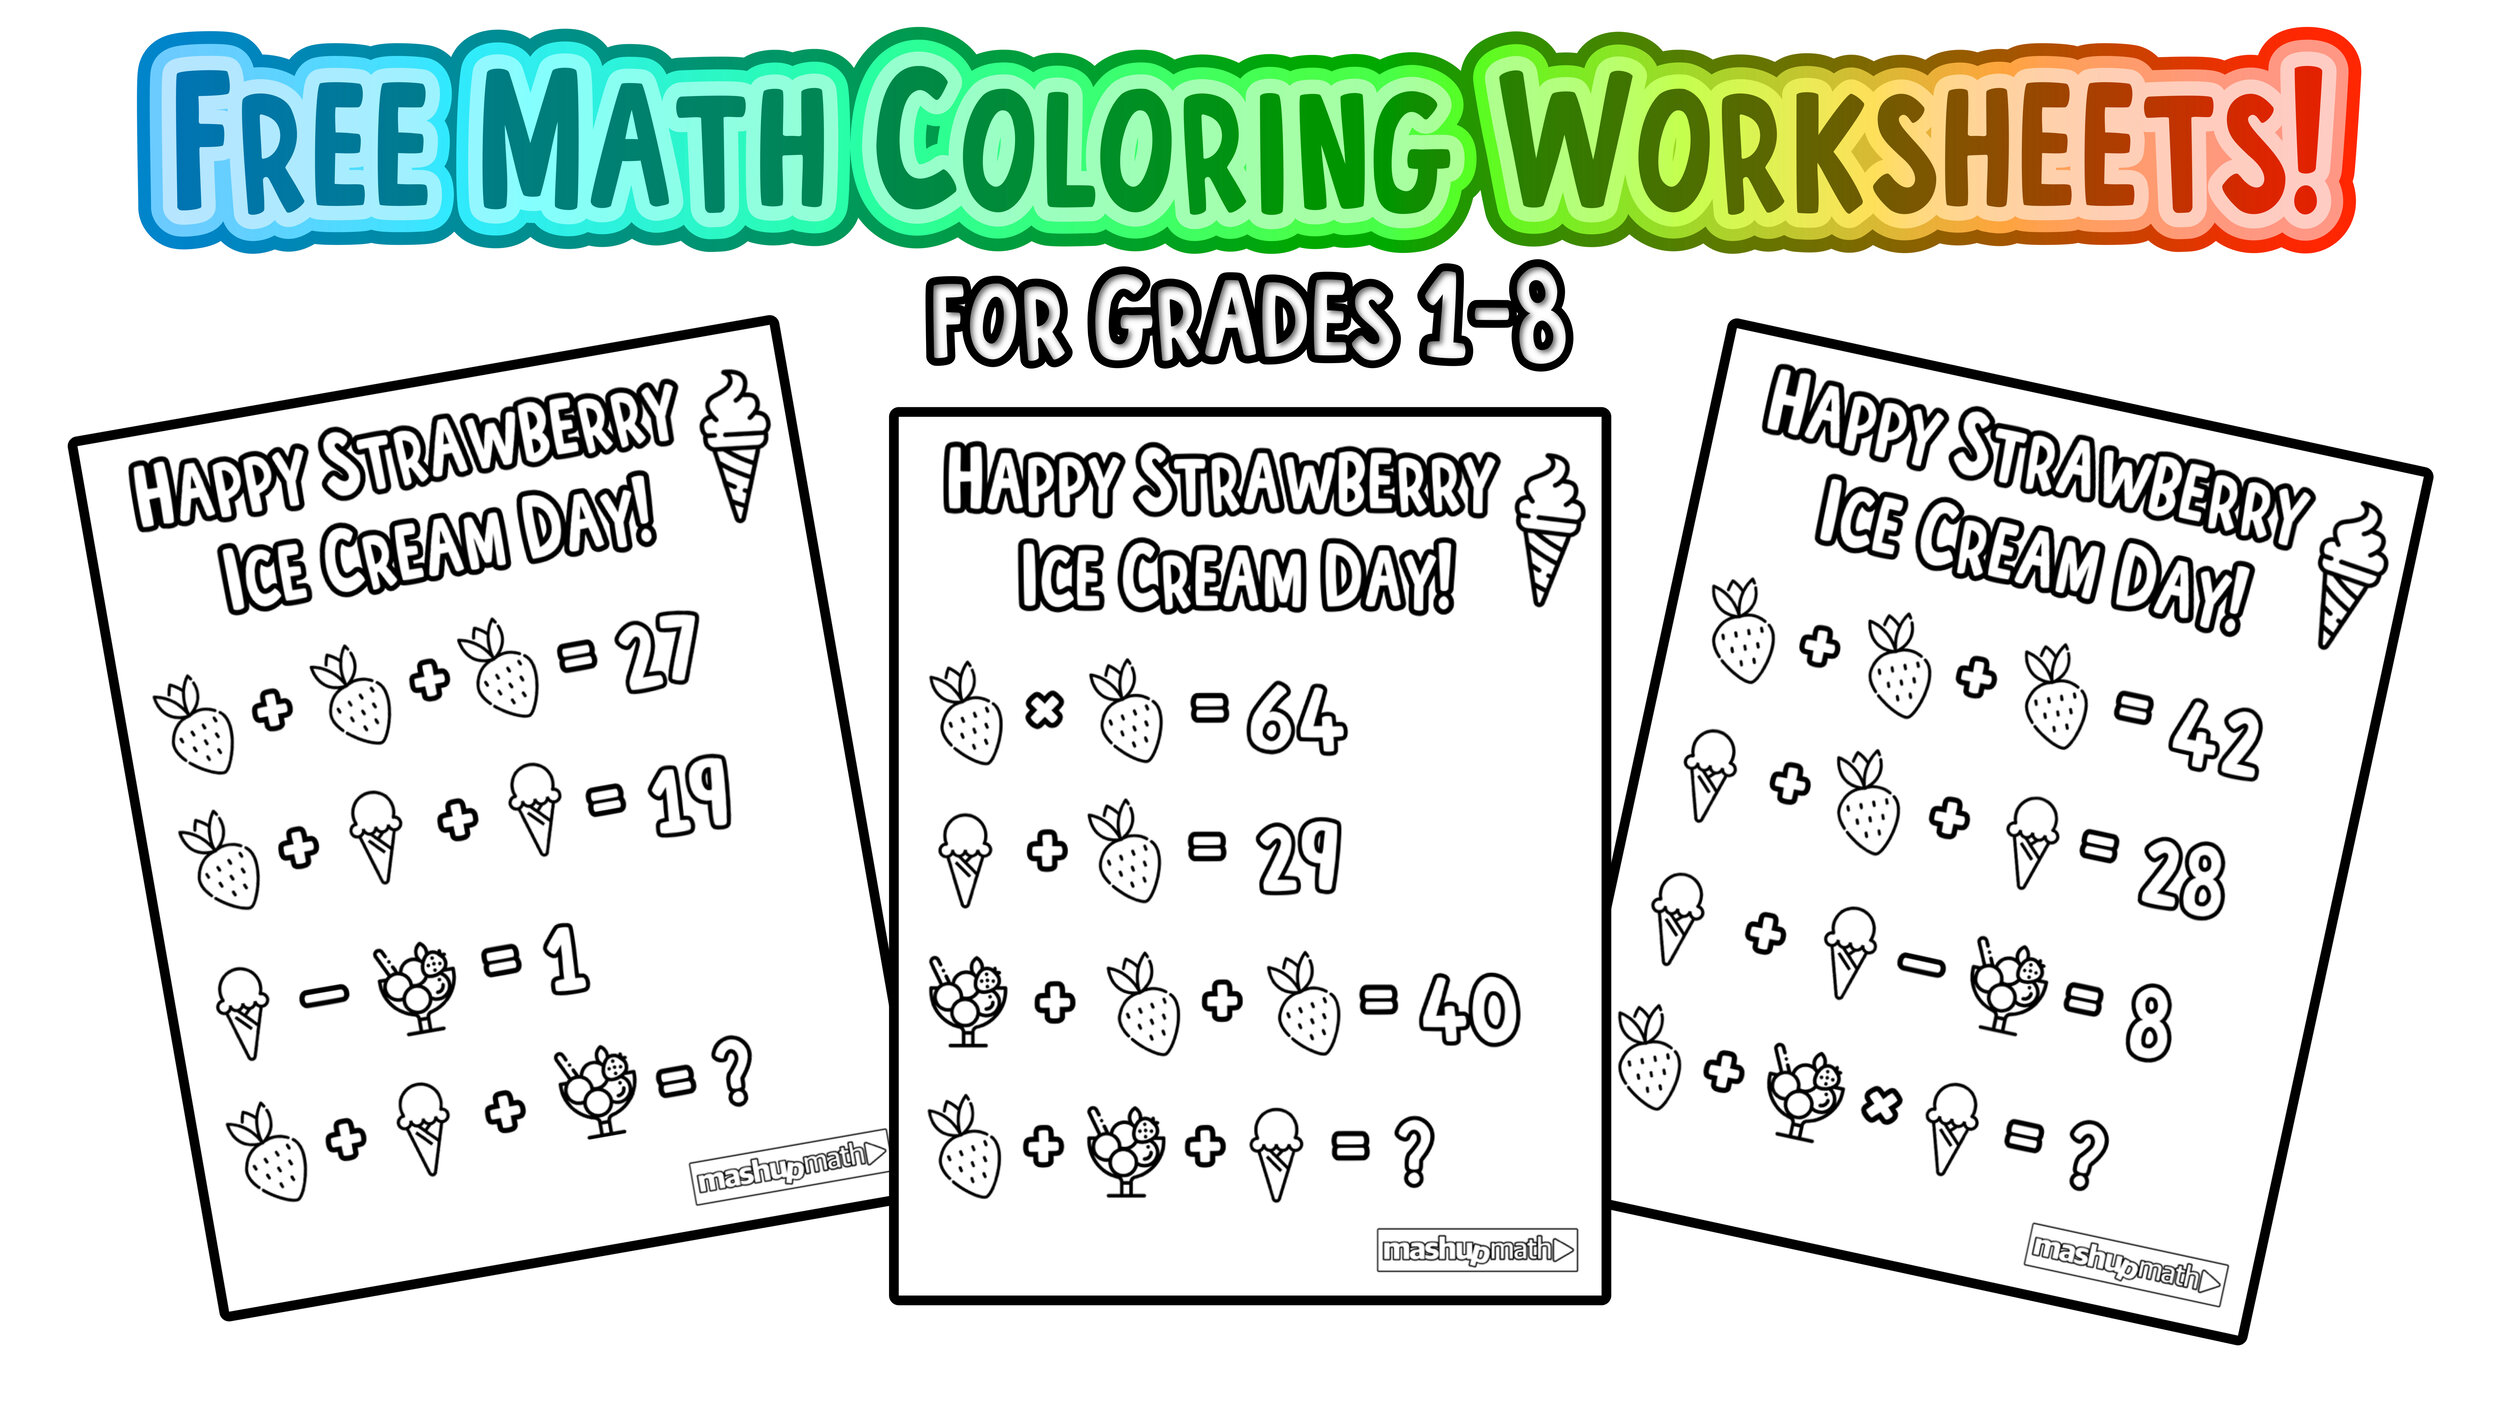 Free math coloring pages for grades